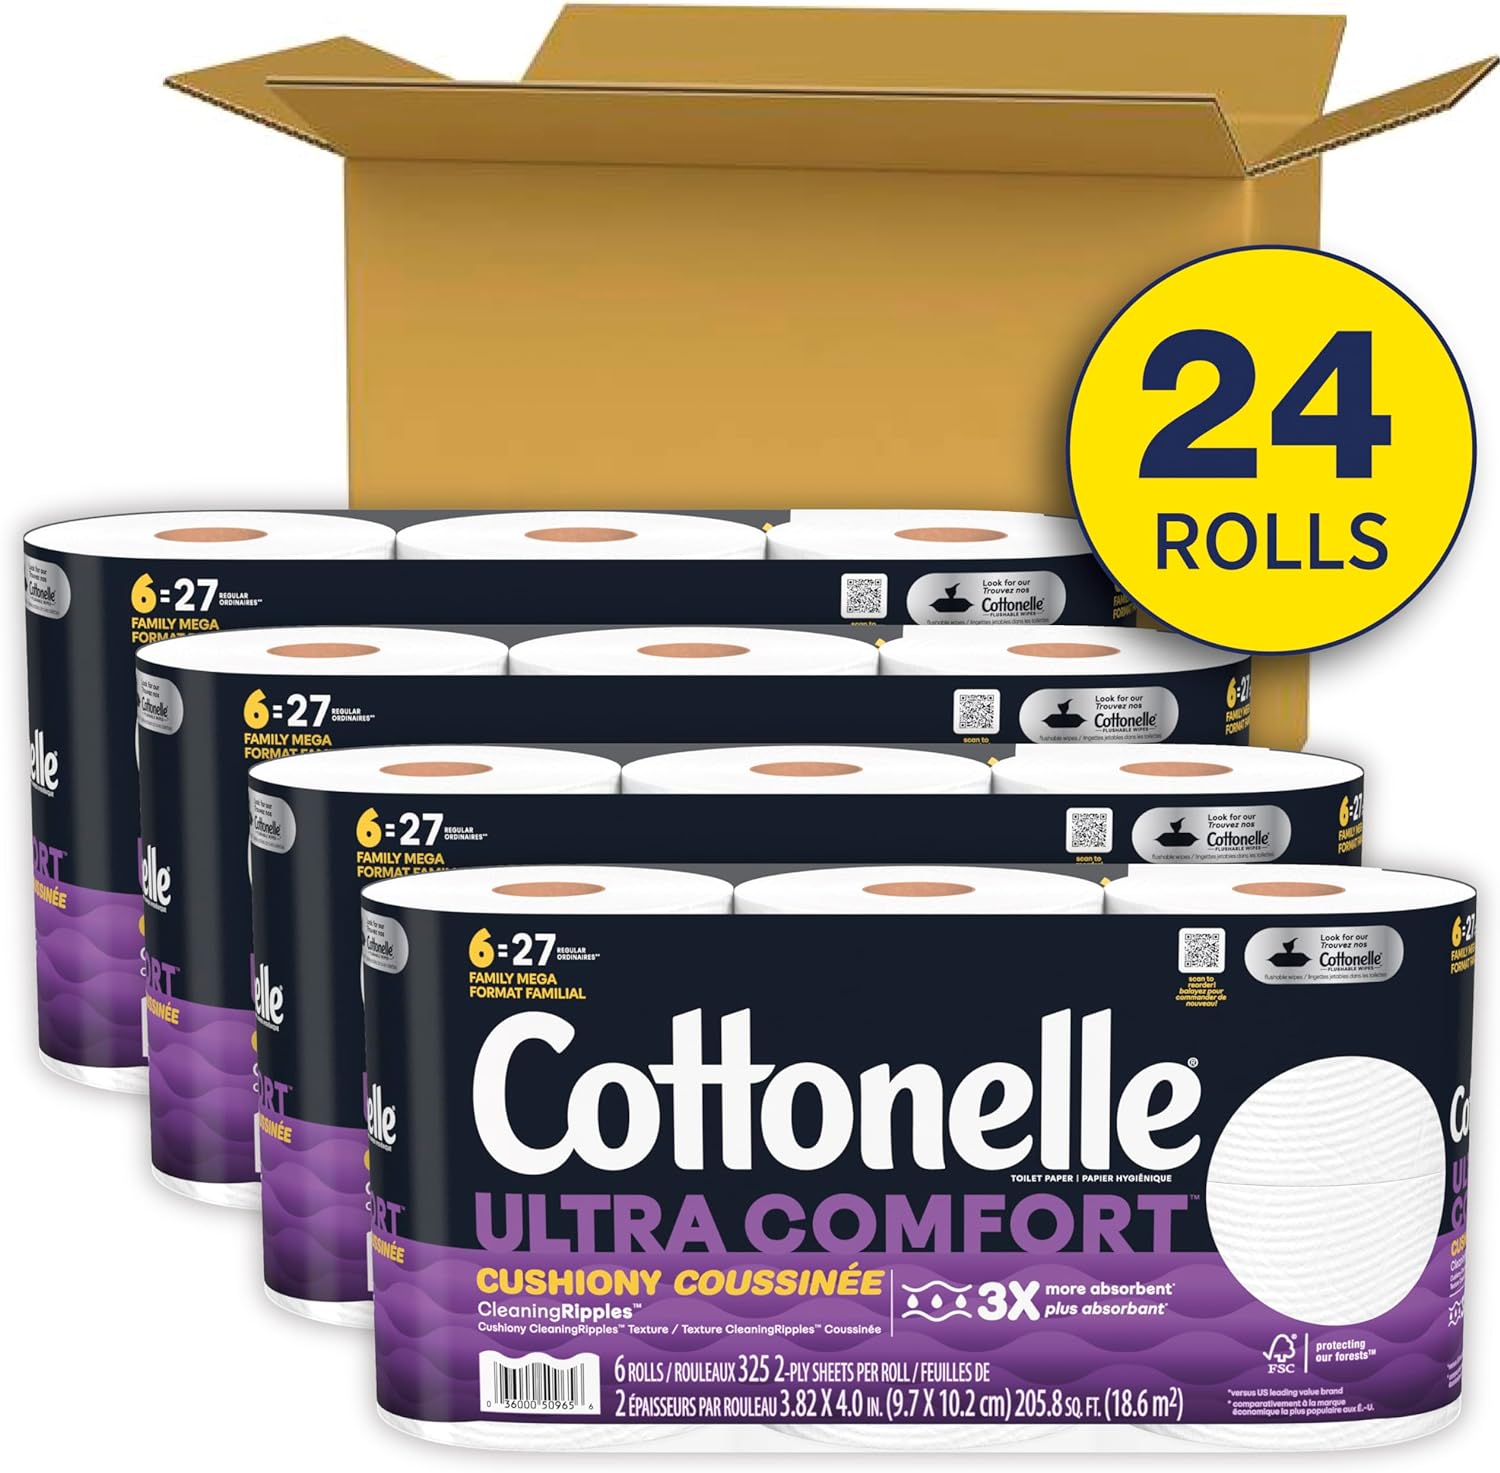 Cottonelle Ultra Comfort Toilet Paper with Cushiony CleaningRipples, 2-Ply, 24 Family Mega Rolls (4 Packs of 6) (24 Family Mega Rolls = 108 Regular Rolls), 325 Sheets per Roll, Packaging May Vary